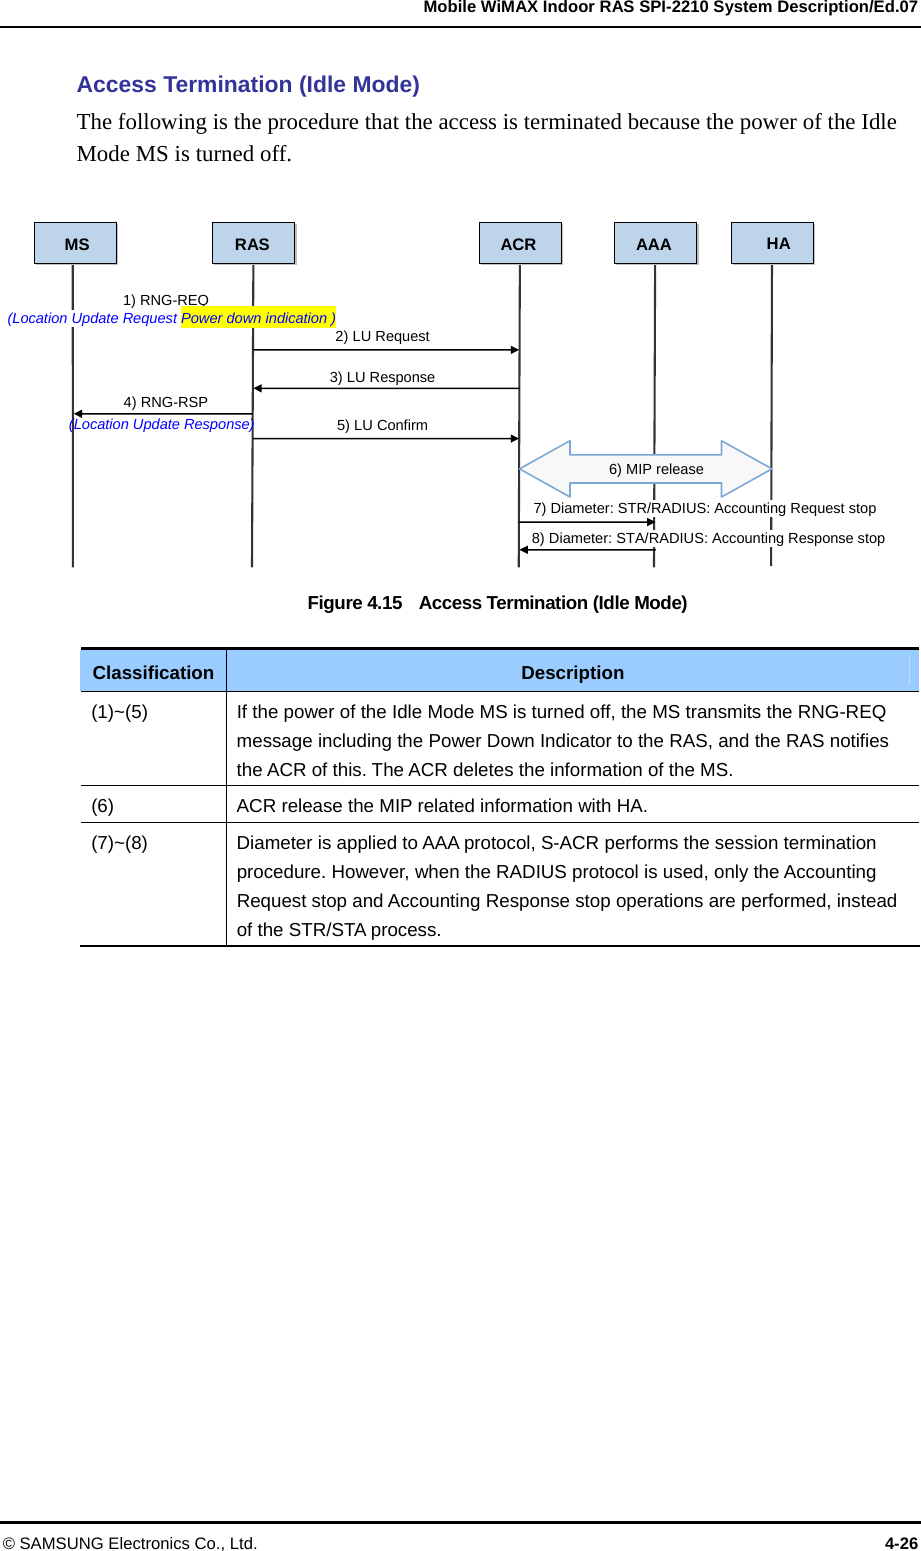   Mobile WiMAX Indoor RAS SPI-2210 System Description/Ed.07 © SAMSUNG Electronics Co., Ltd.  4-26 Access Termination (Idle Mode) The following is the procedure that the access is terminated because the power of the Idle Mode MS is turned off.    Figure 4.15    Access Termination (Idle Mode)  Classification  Description (1)~(5)  If the power of the Idle Mode MS is turned off, the MS transmits the RNG-REQ message including the Power Down Indicator to the RAS, and the RAS notifies the ACR of this. The ACR deletes the information of the MS.   (6)  ACR release the MIP related information with HA. (7)~(8)  Diameter is applied to AAA protocol, S-ACR performs the session termination procedure. However, when the RADIUS protocol is used, only the Accounting Request stop and Accounting Response stop operations are performed, instead of the STR/STA process.  MS  RAS ACR1) RNG-REQ (Location Update Request Power down indication ) 2) LU Request 4) RNG-RSP (Location Update Response) 3) LU Response 5) LU Confirm AAA HA 6) MIP release 7) Diameter: STR/RADIUS: Accounting Request stop 8) Diameter: STA/RADIUS: Accounting Response stop 